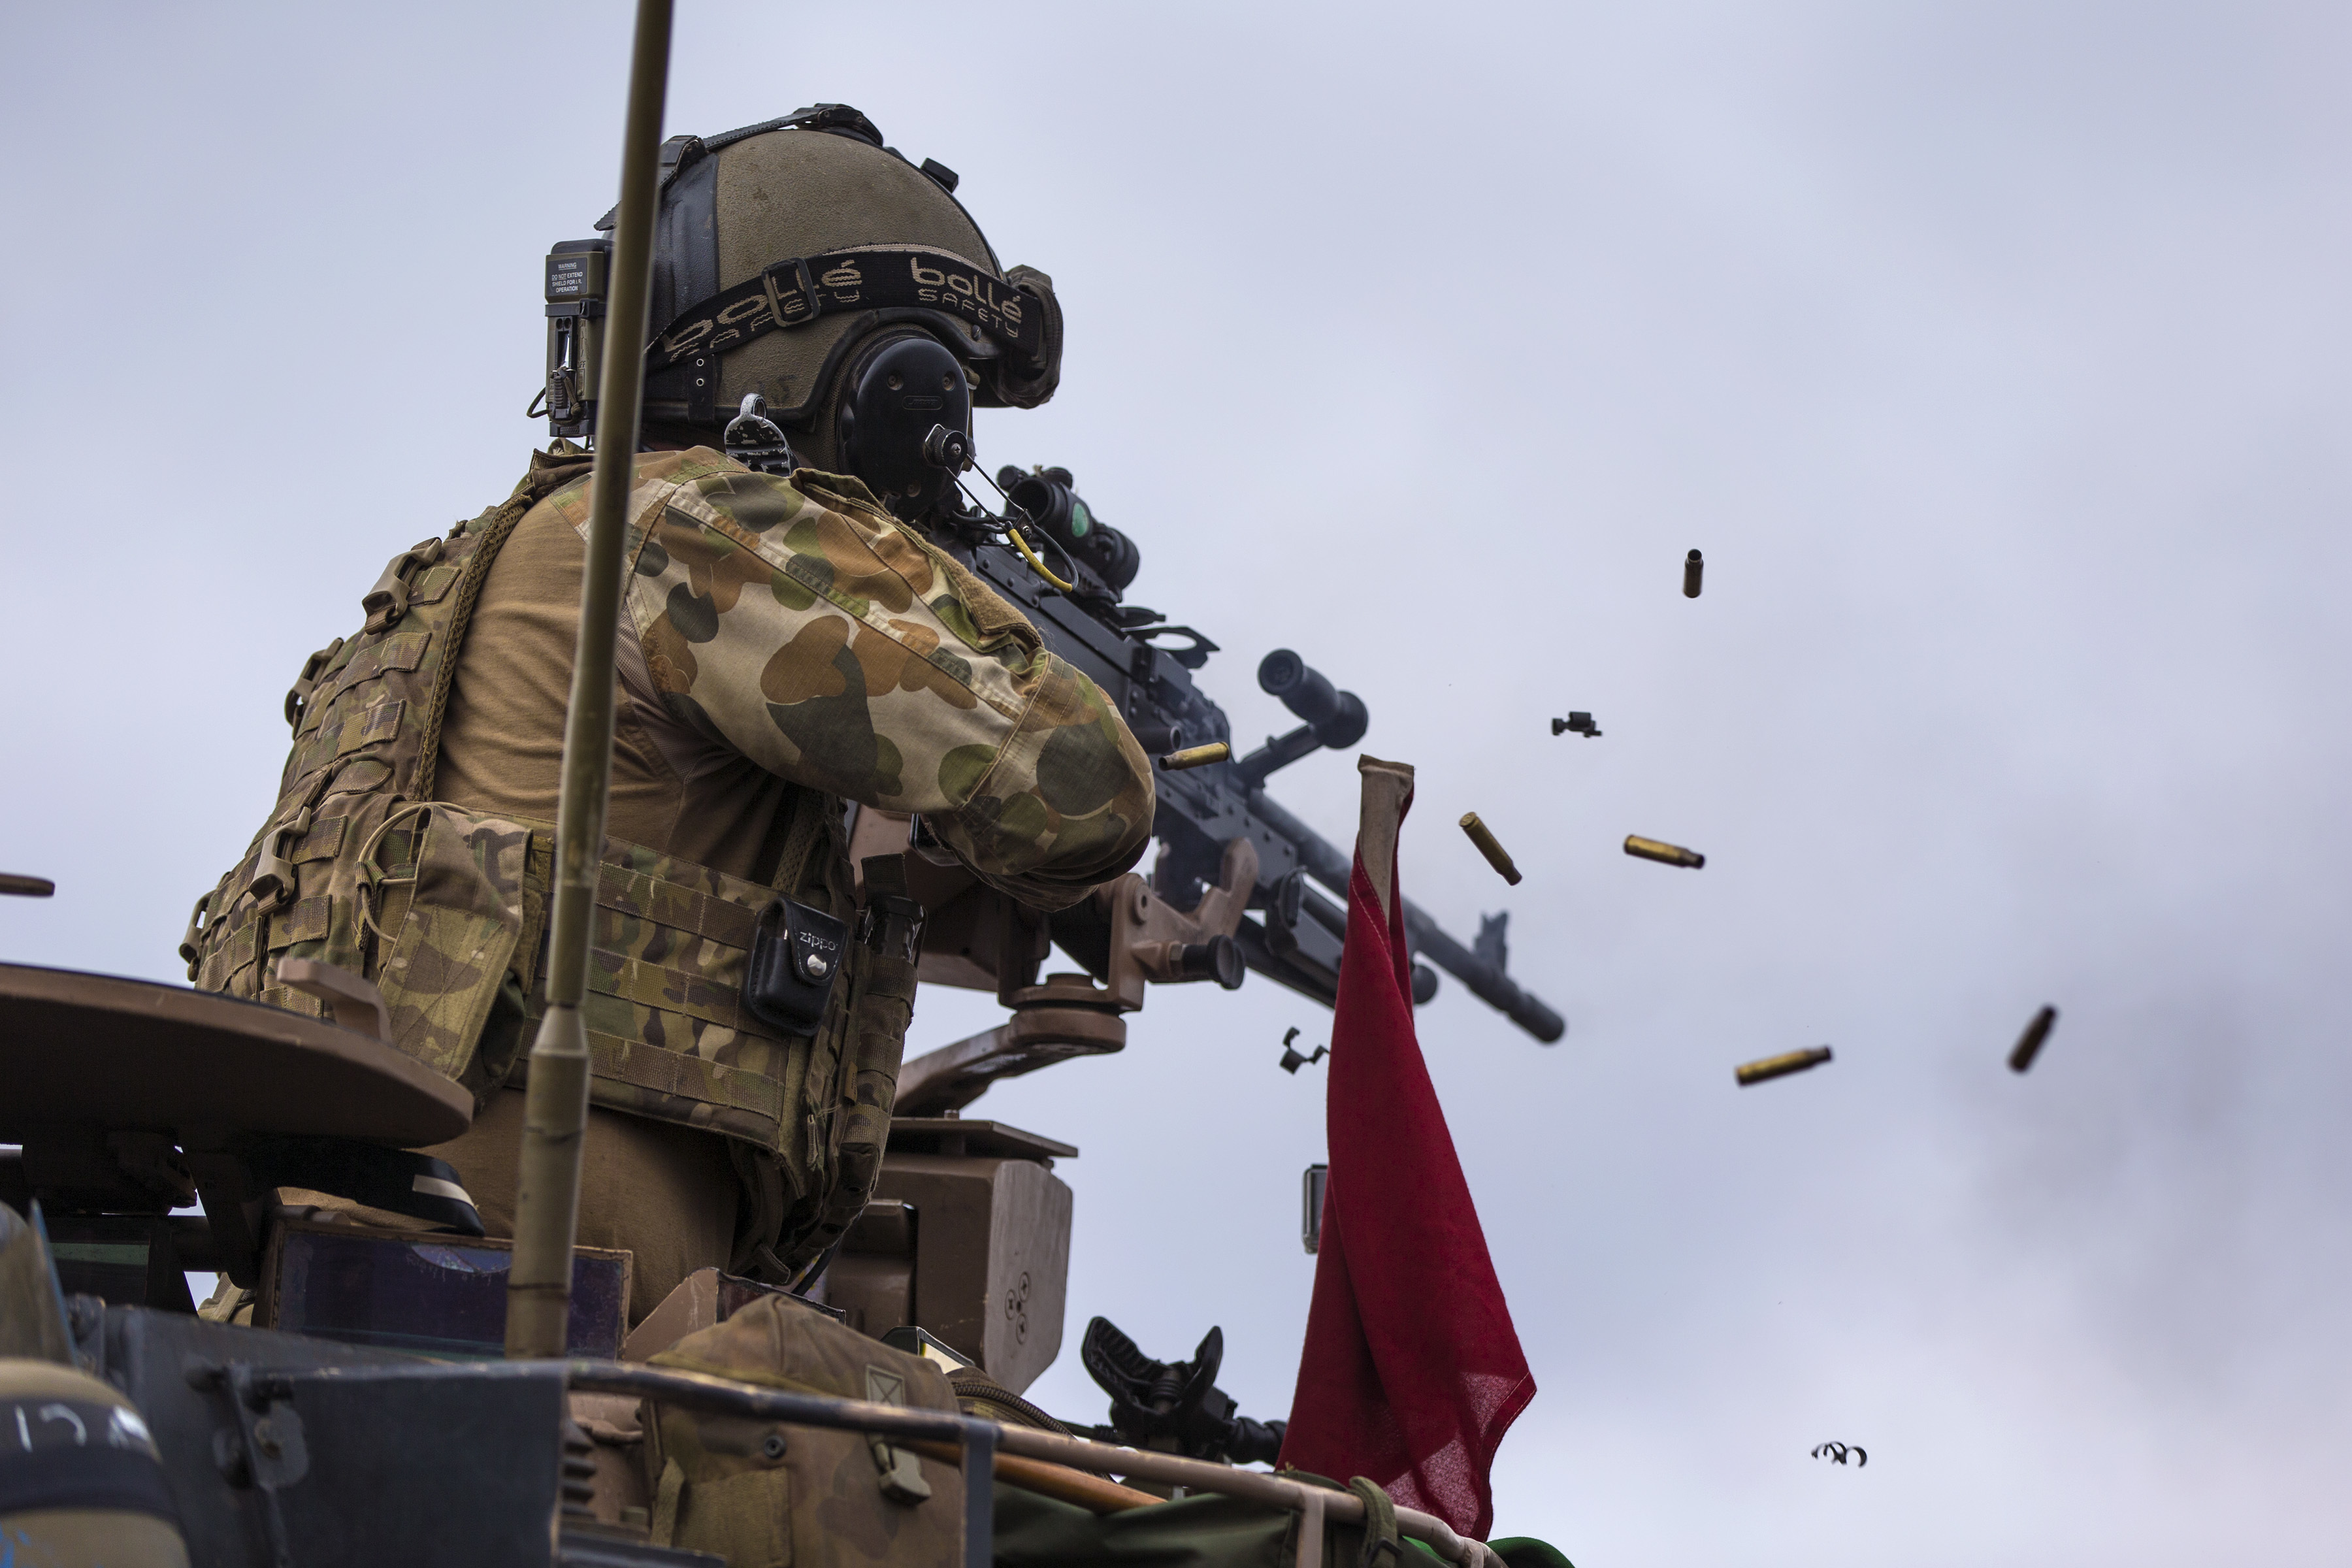 Australian Army Troop Sergeant Nick O'Halloran from the 2nd Cavalry Regiment engages targets with a MAG-58 machine gun during a live fire range practice on Exercise Rim of the Pacific 2016. Australian Defence Force Photo